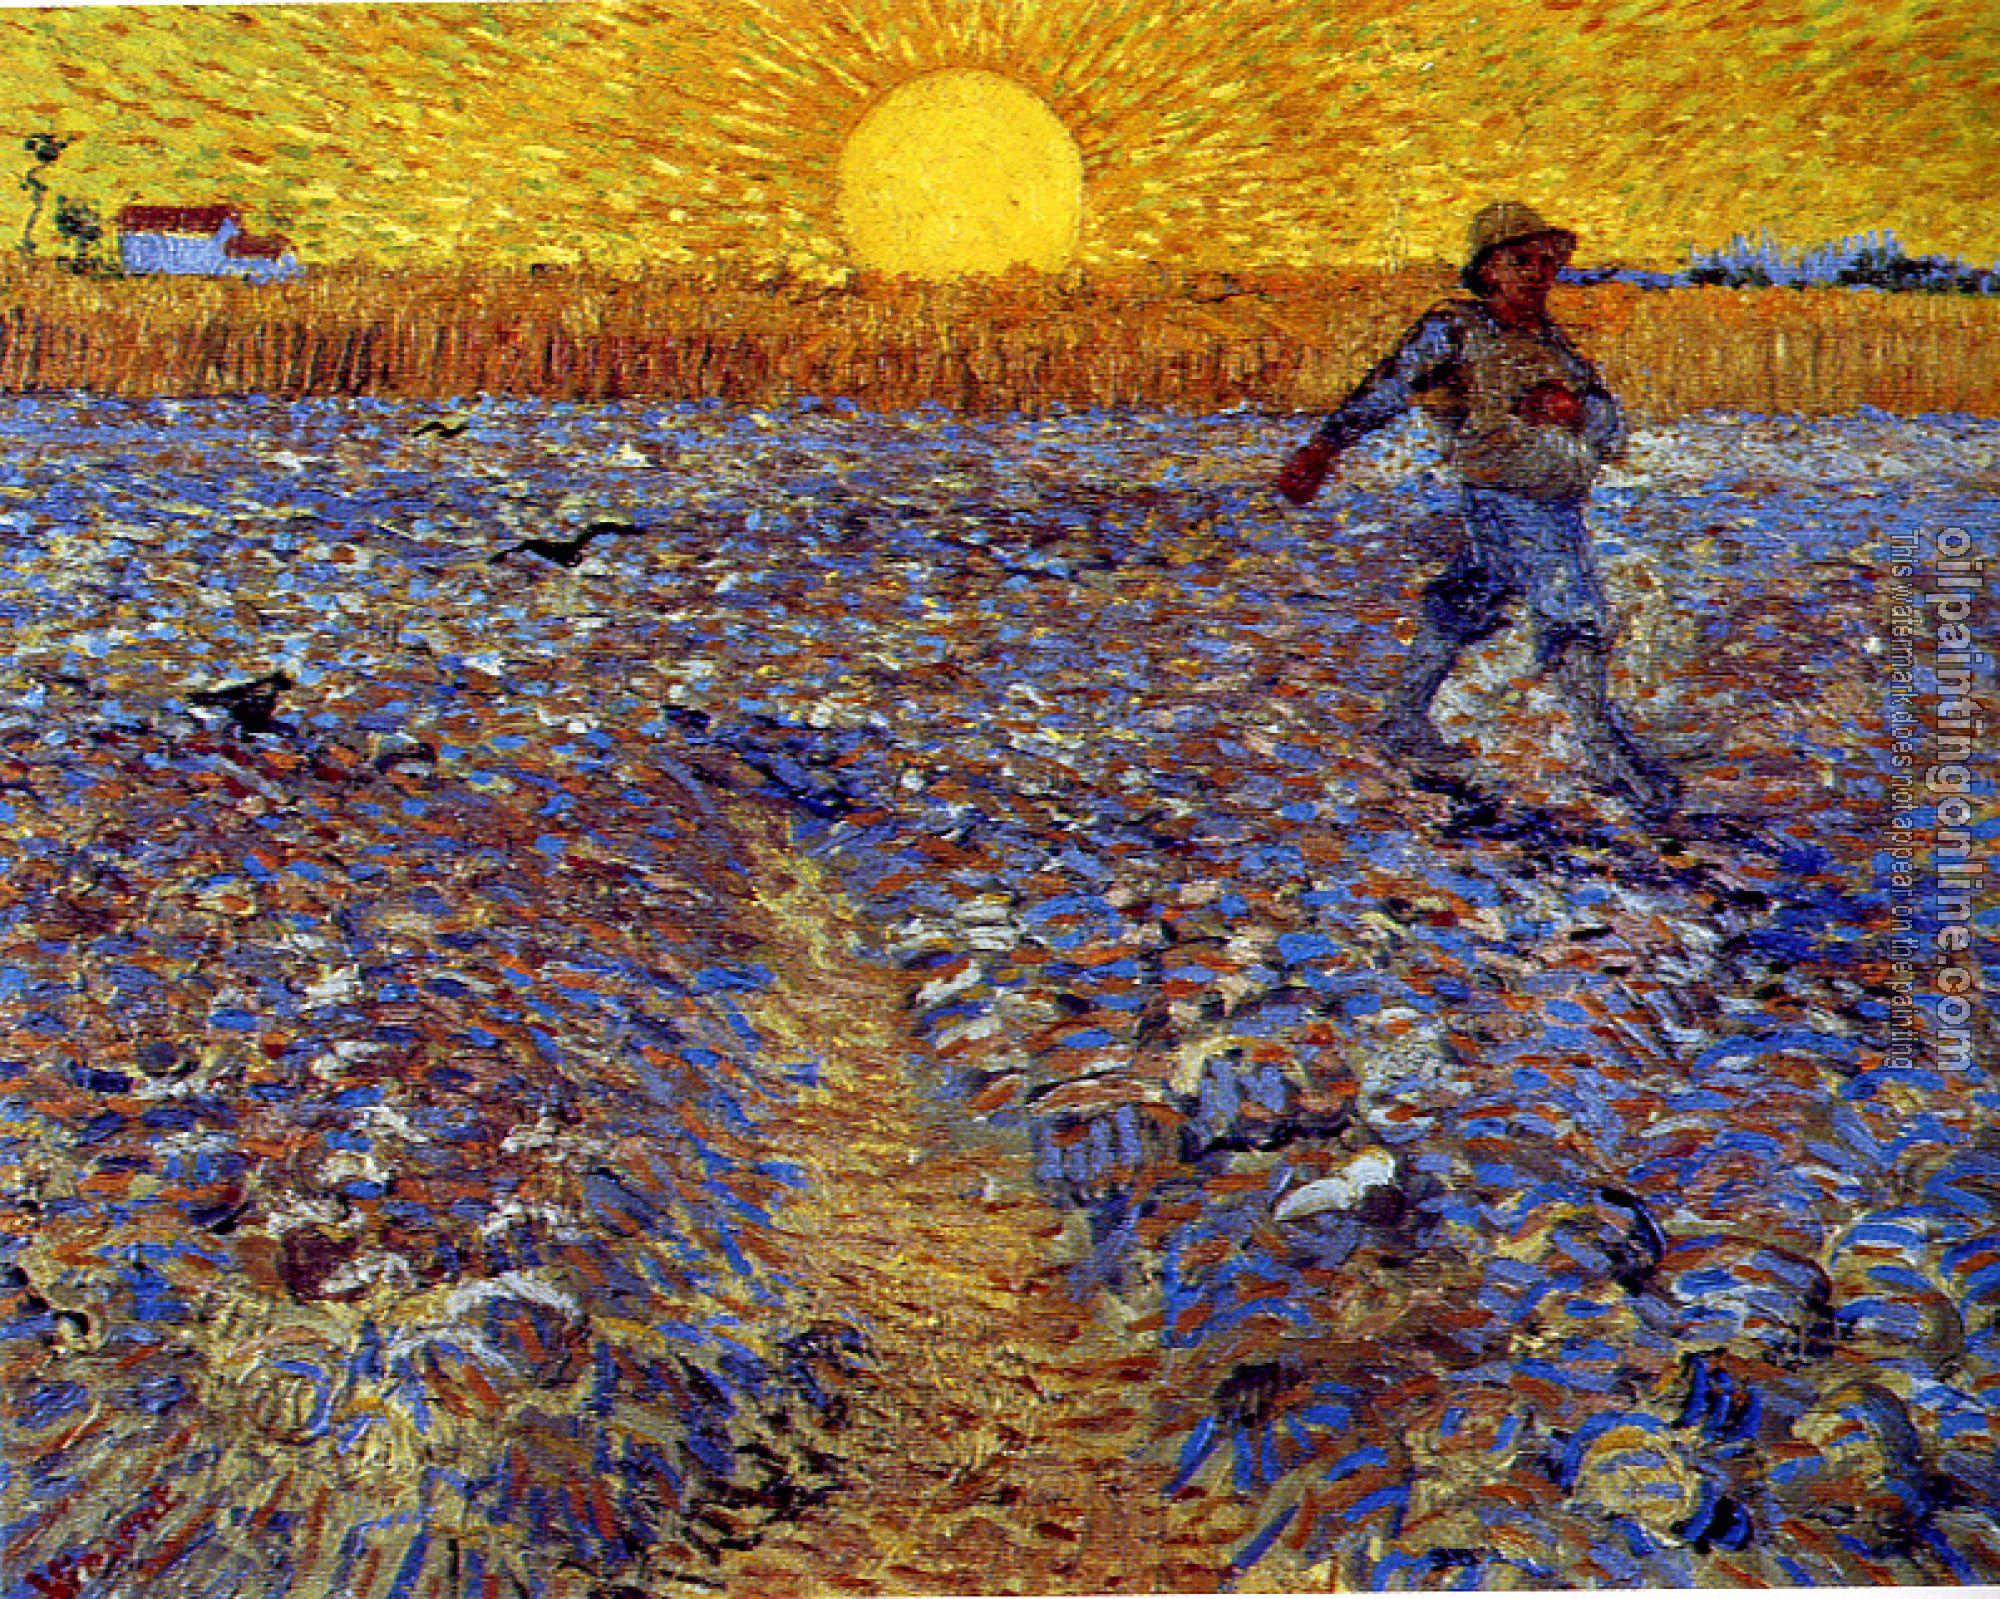 Gogh, Vincent van - Sower with Setting Sun